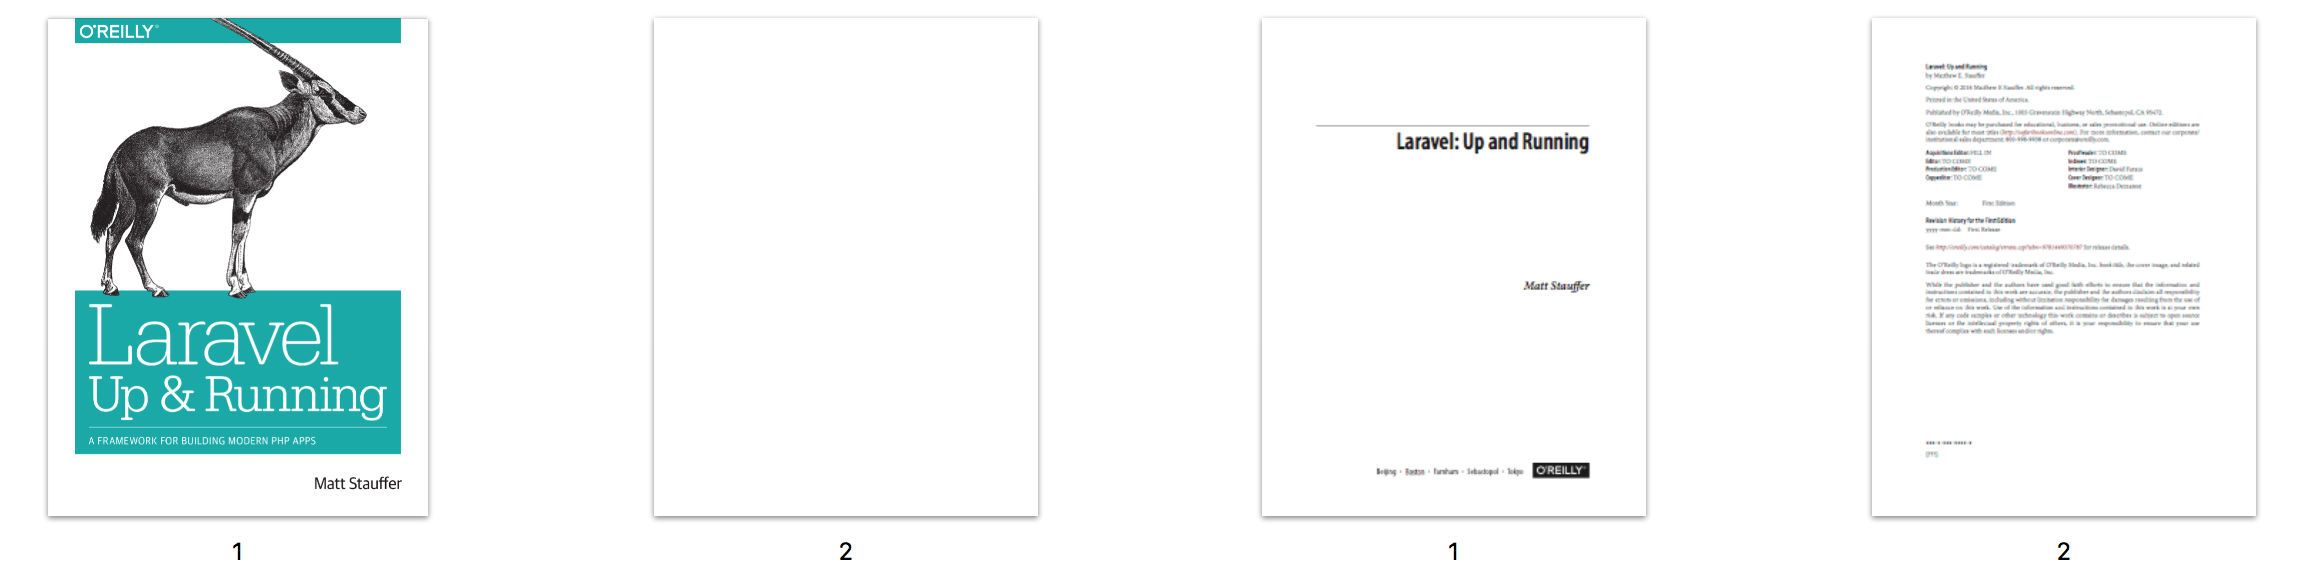 Laravel Up and Running book cover in a grid